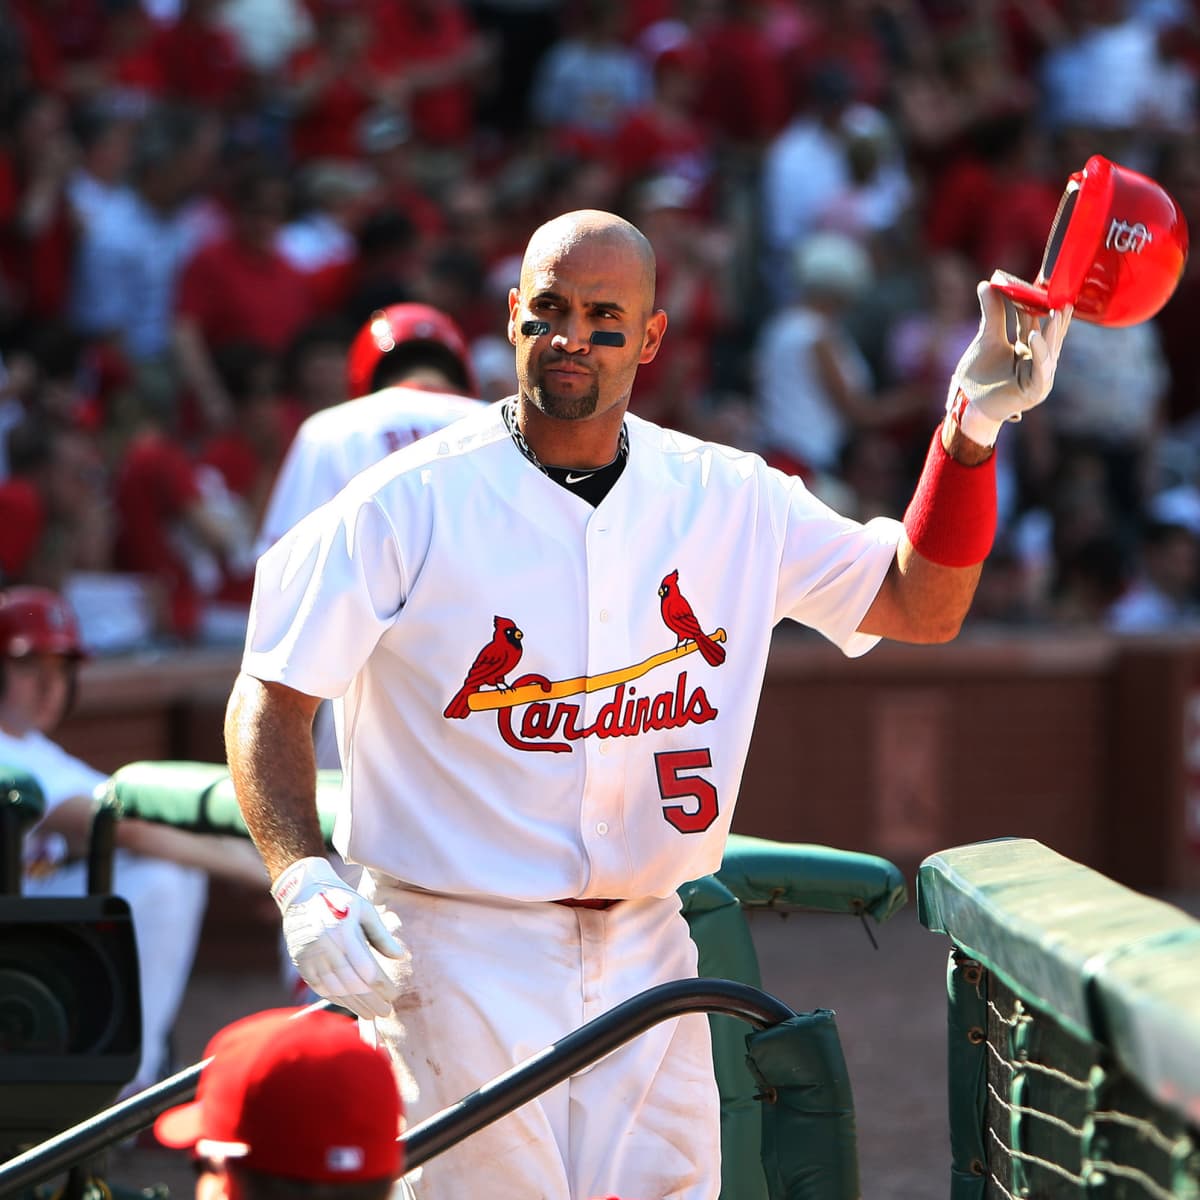 Albert Pujols greeted with minute-long ovation from Cardinals fans